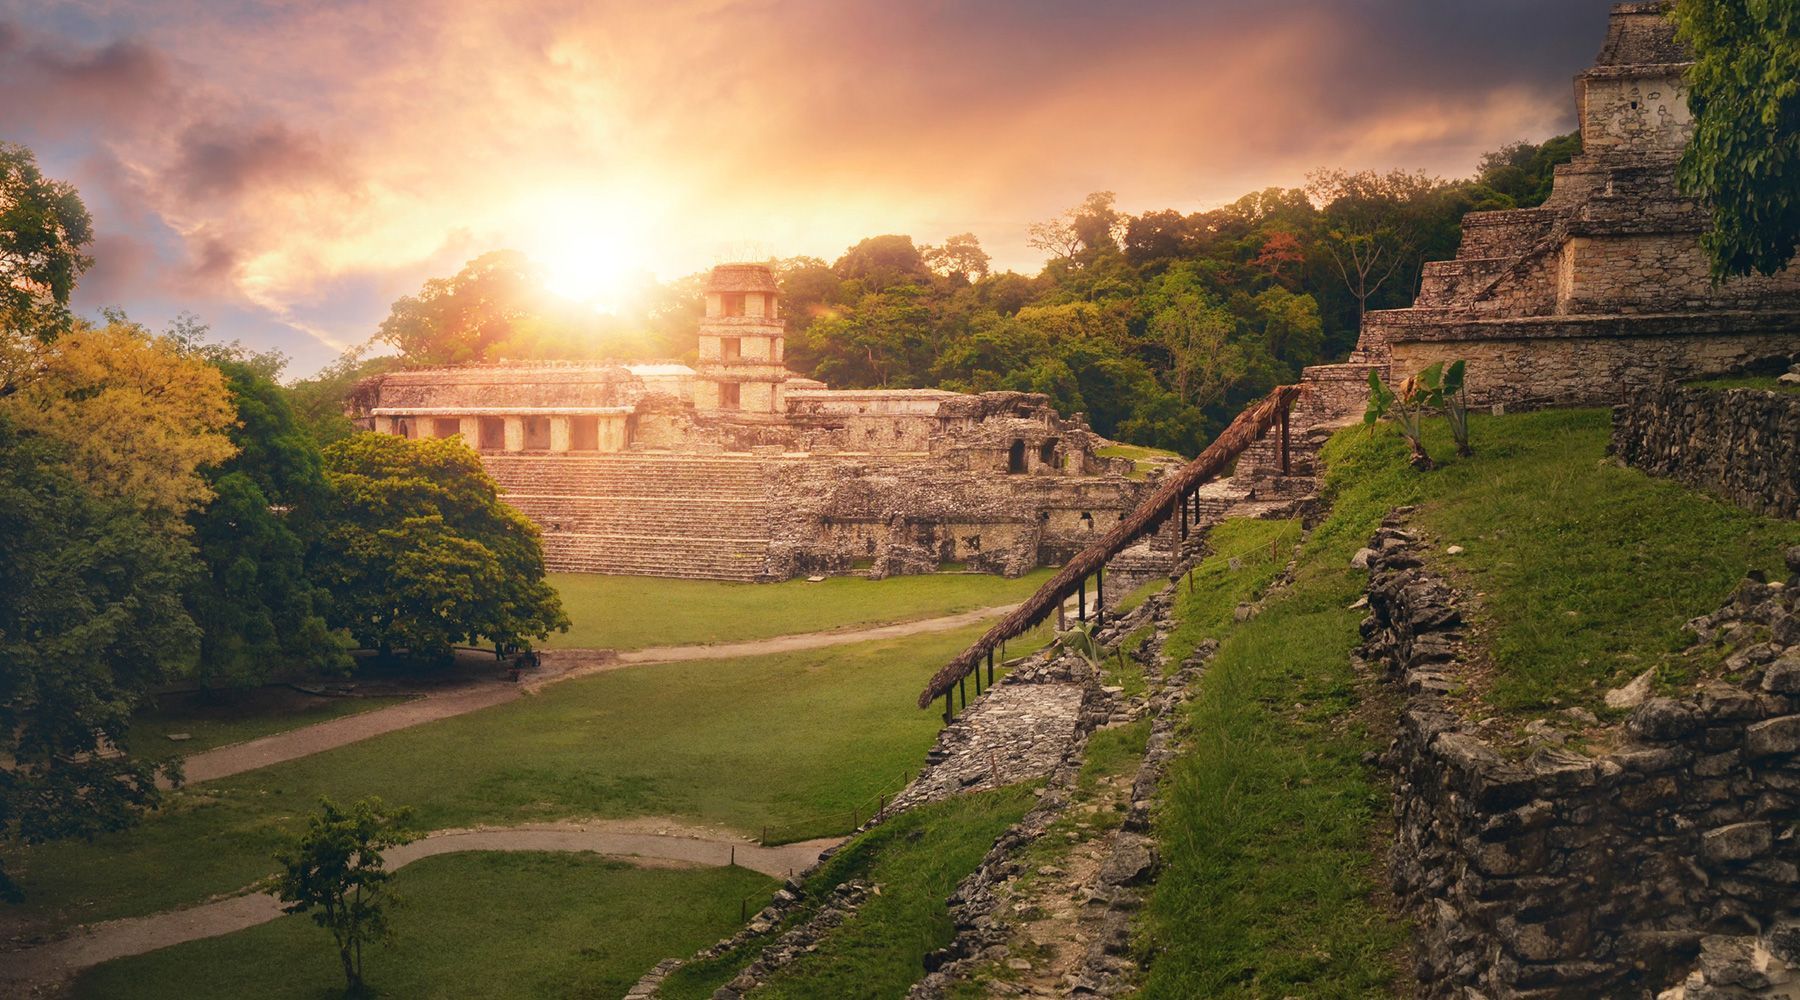 The Archaeological Zone of Palenque in Chiapas